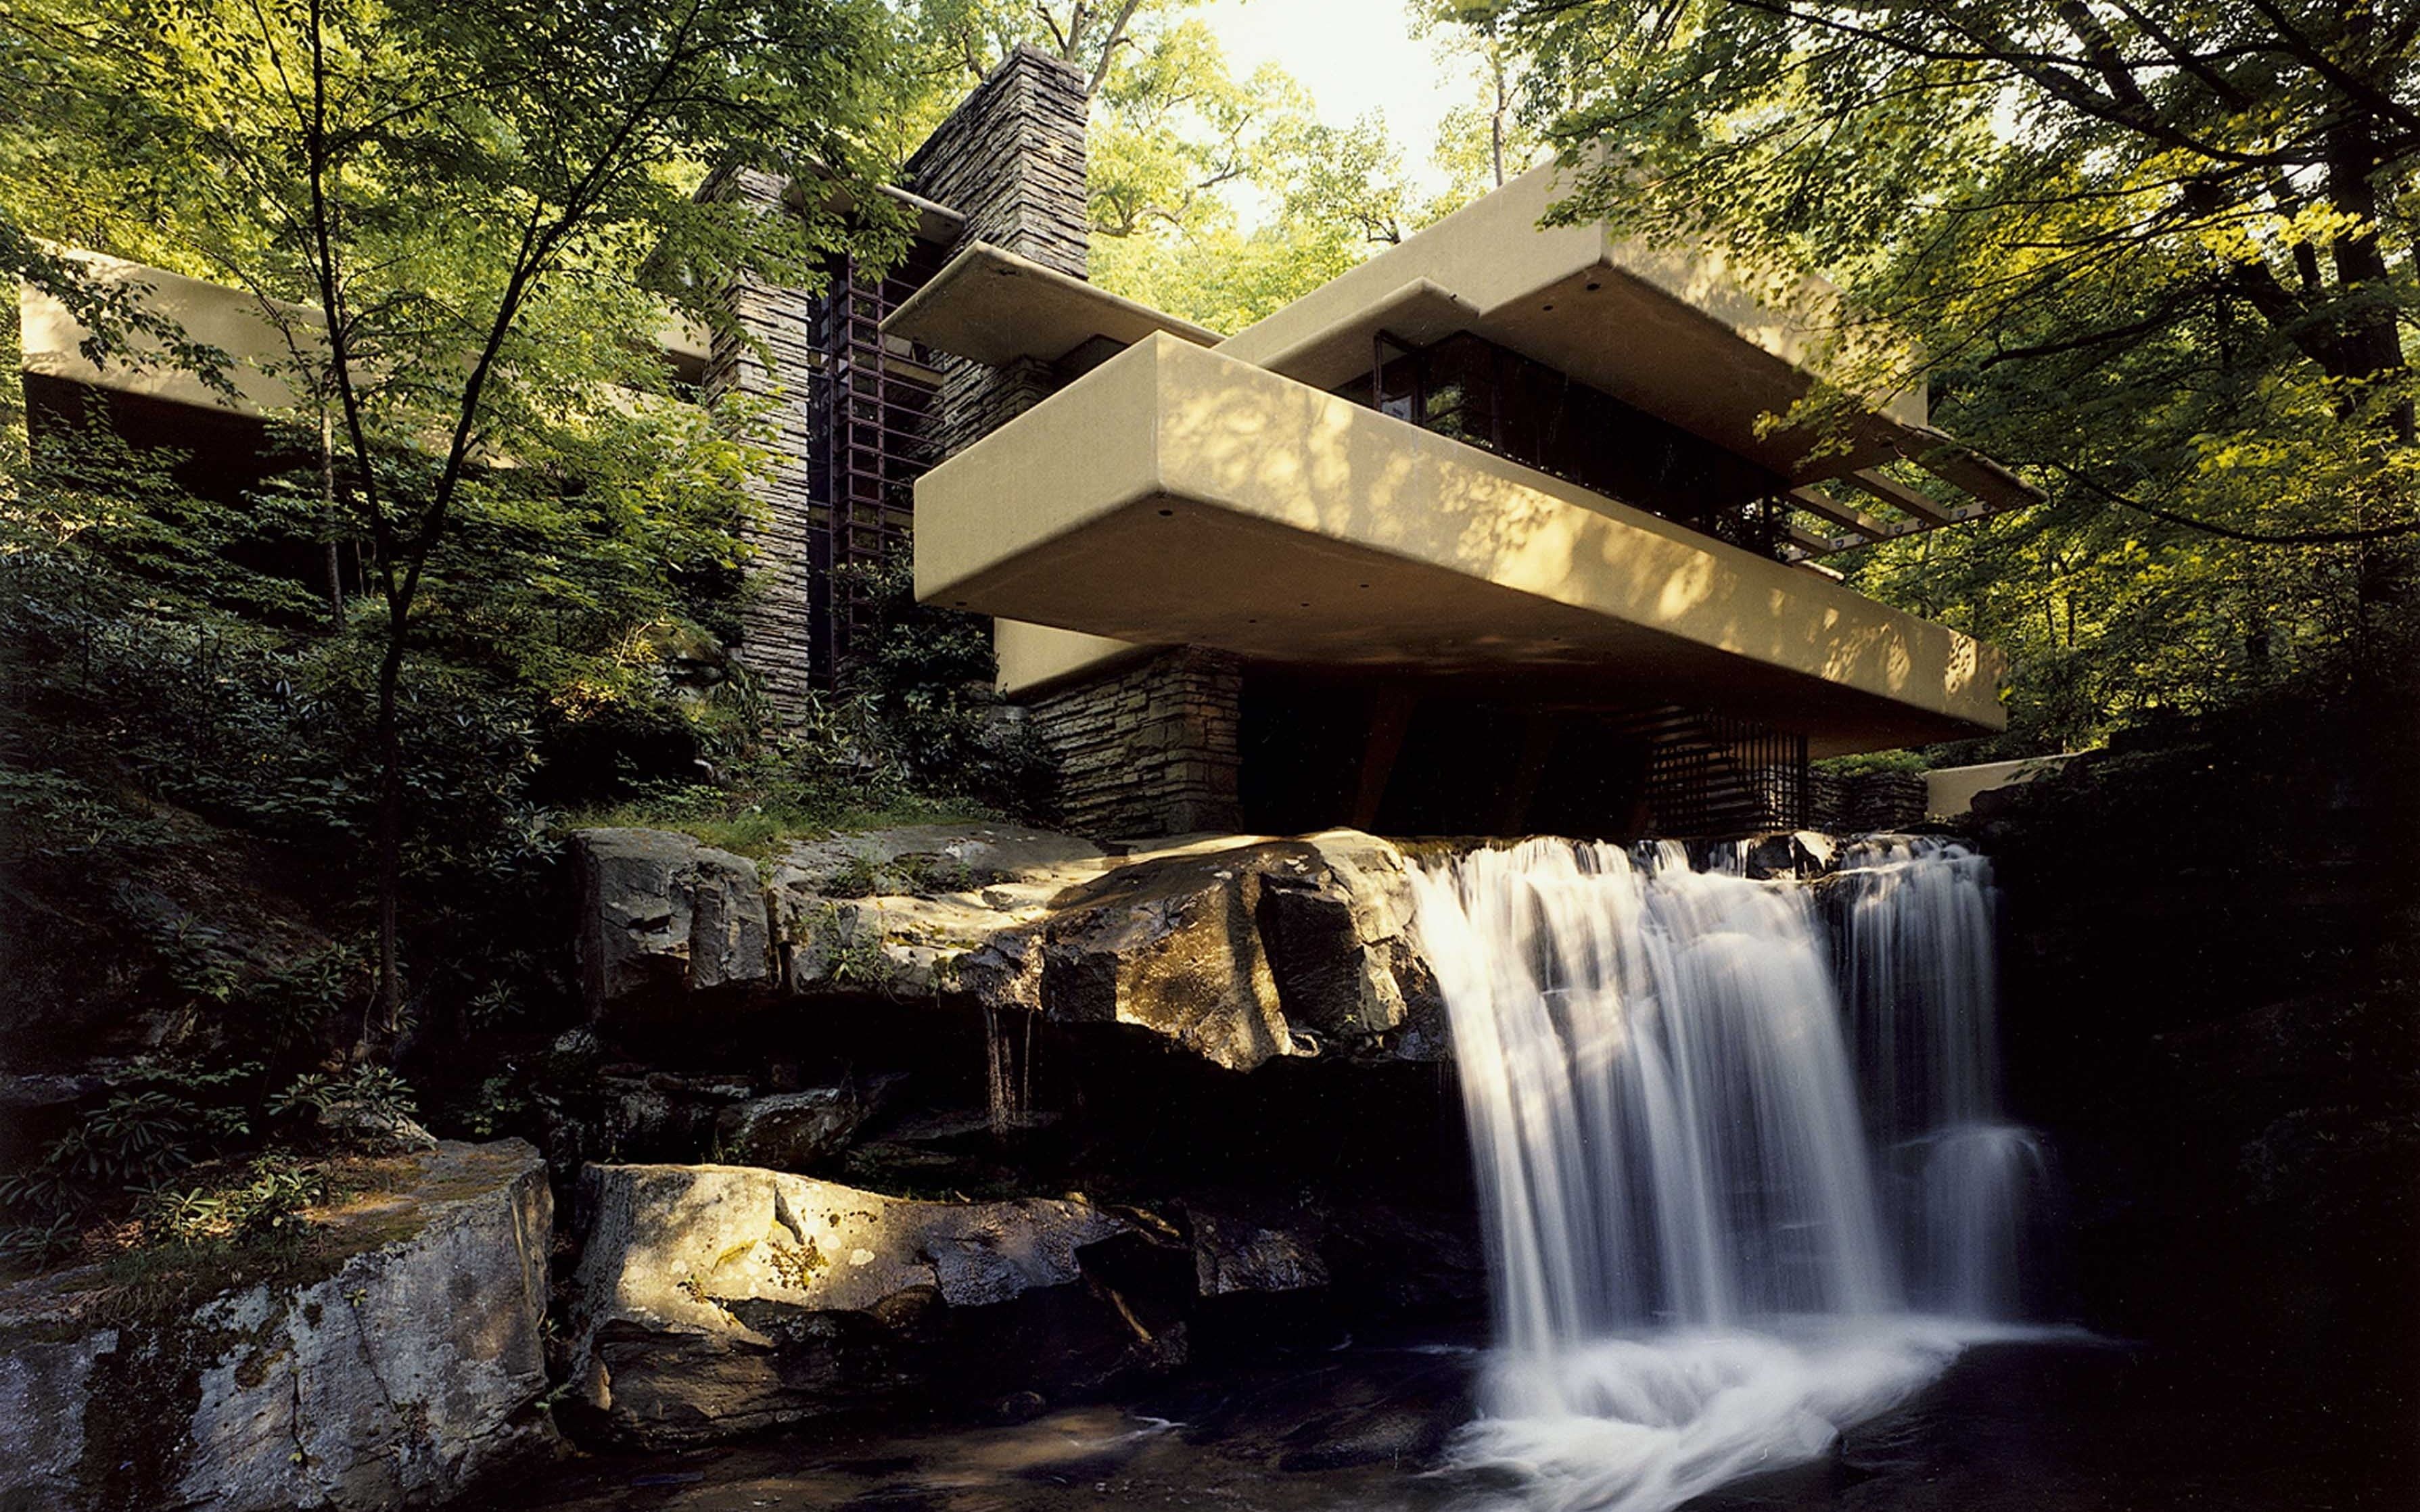 brown and gray concrete house #waterfall Falling Water Frank Lloyd Wright #building #tr. Falling water frank lloyd wright, Frank lloyd wright, Famous architecture